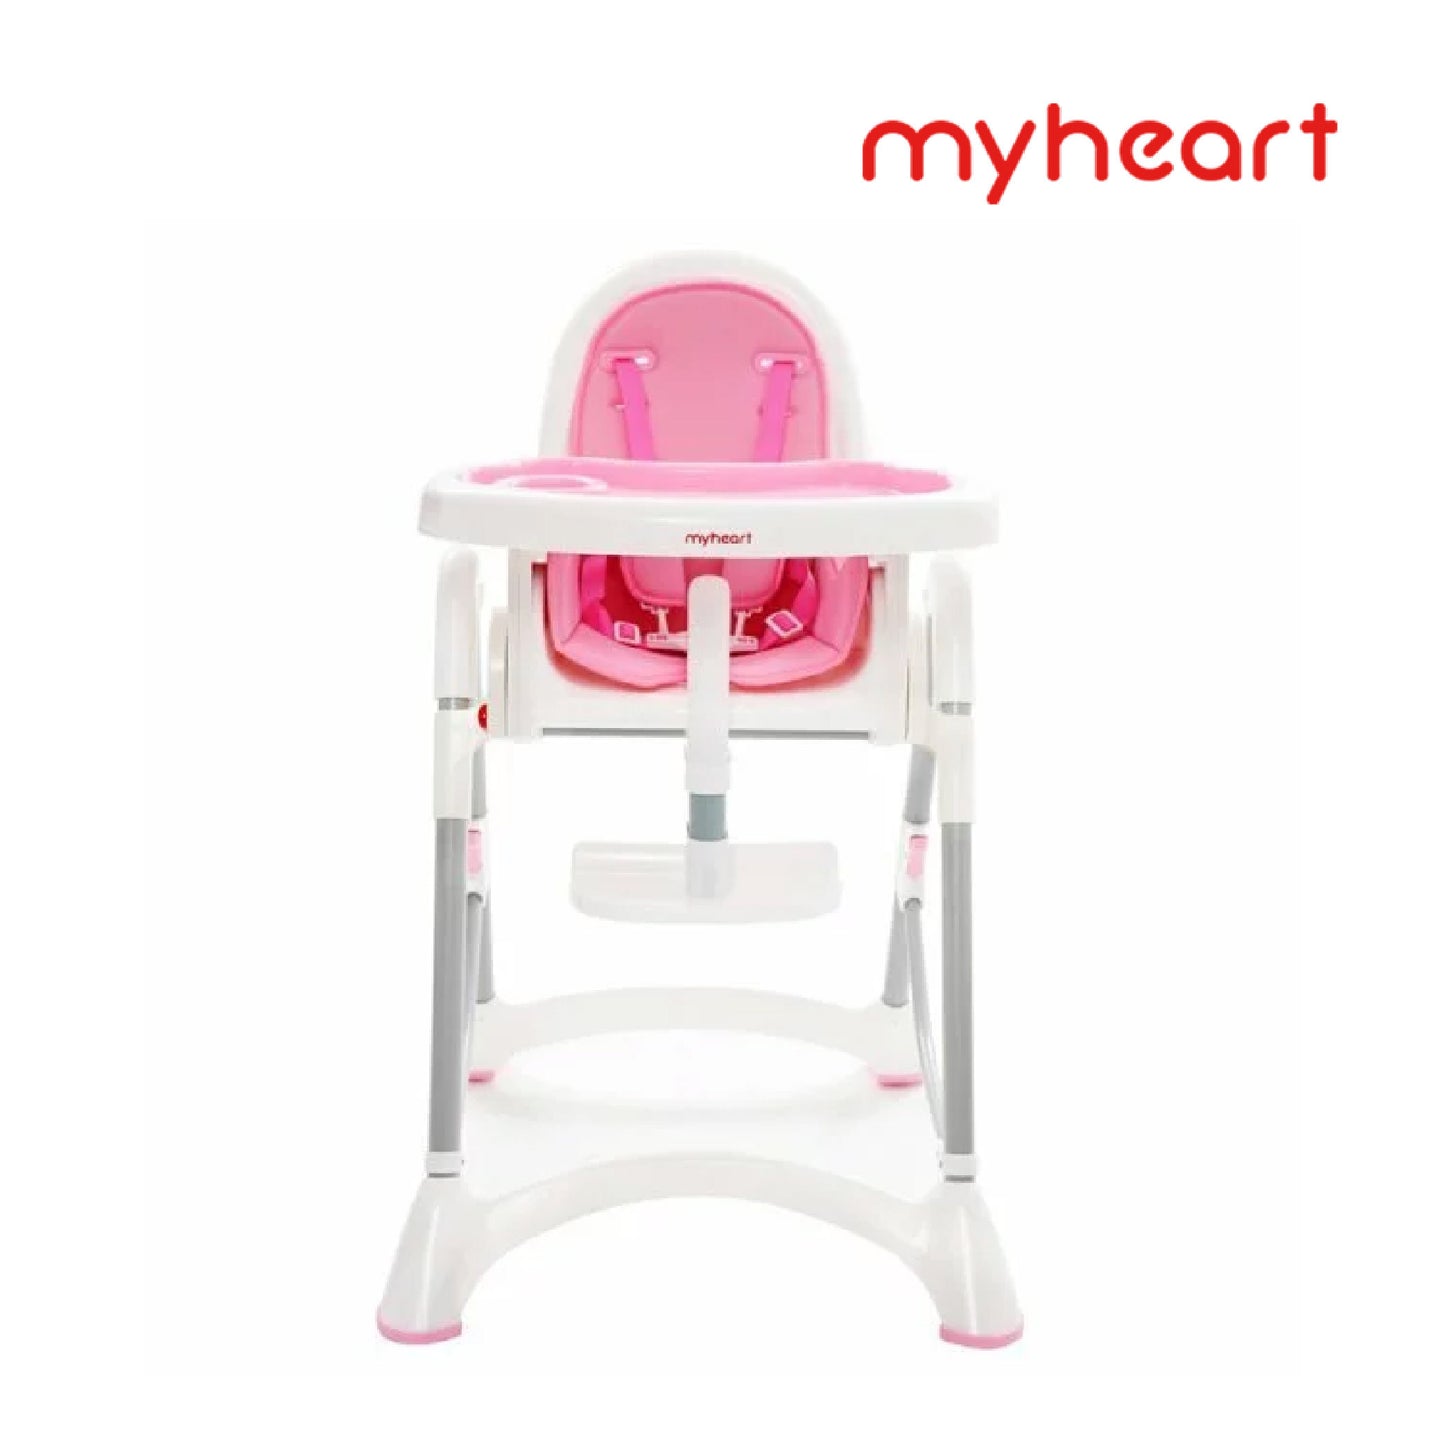 【myheart】Folding child safety dining chair-peach pink